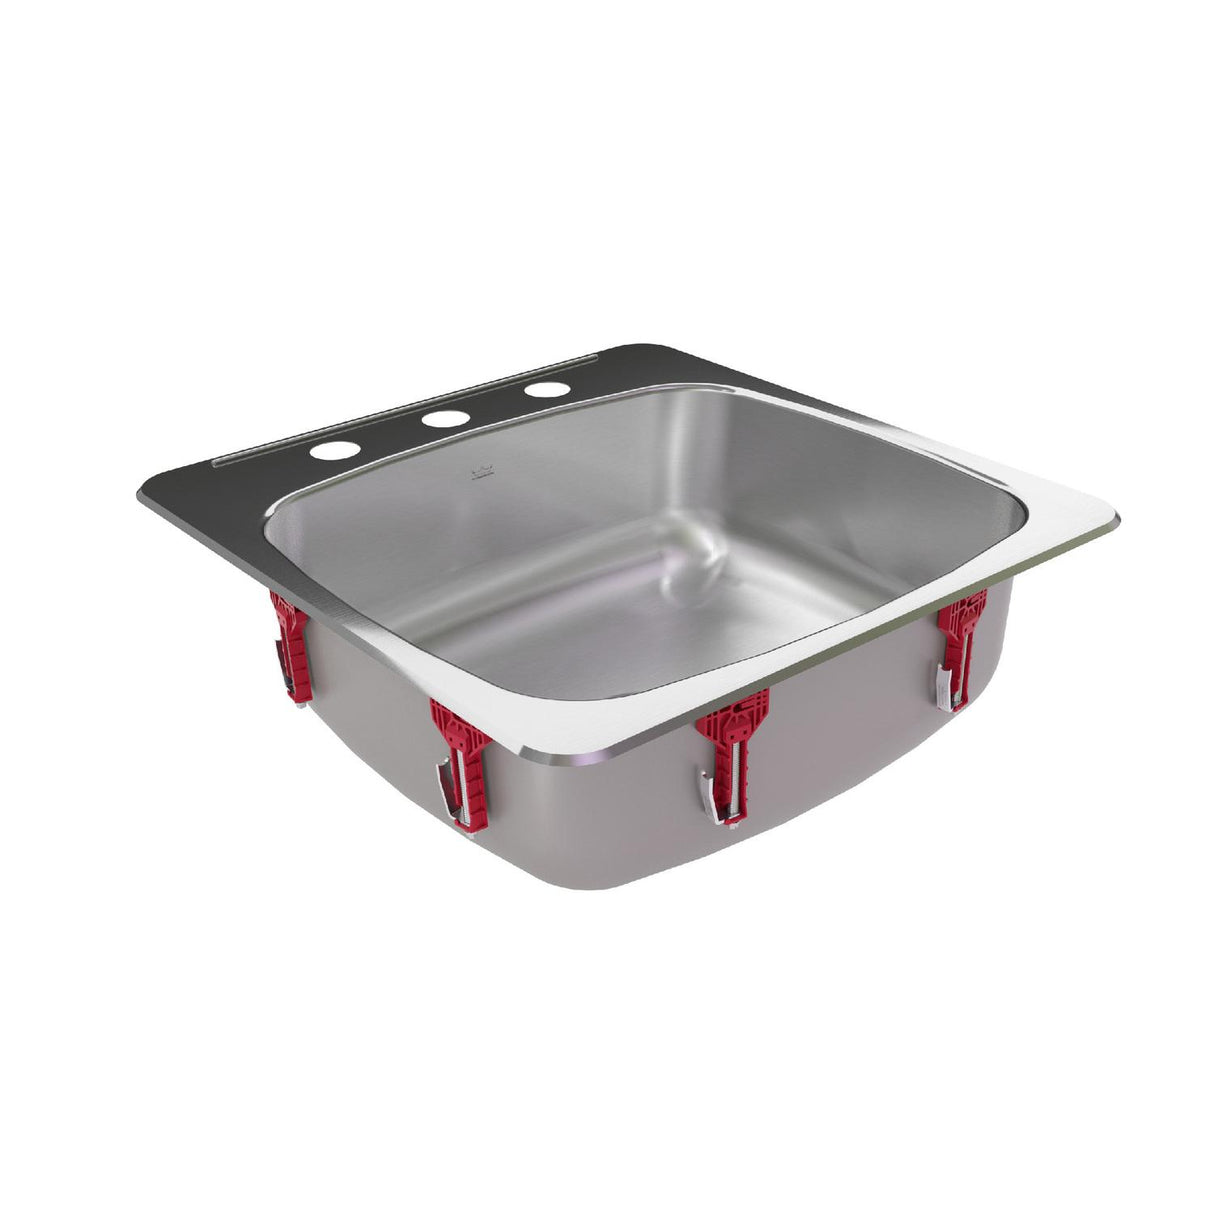 KINDRED RSL2020-3N Reginox 20.13-in LR x 20.56-in FB x 7-in DP Drop In Single Bowl 3-Hole Stainless Steel Kitchen Sink In Linear Brushed Bowl with Mirror Finished Rim